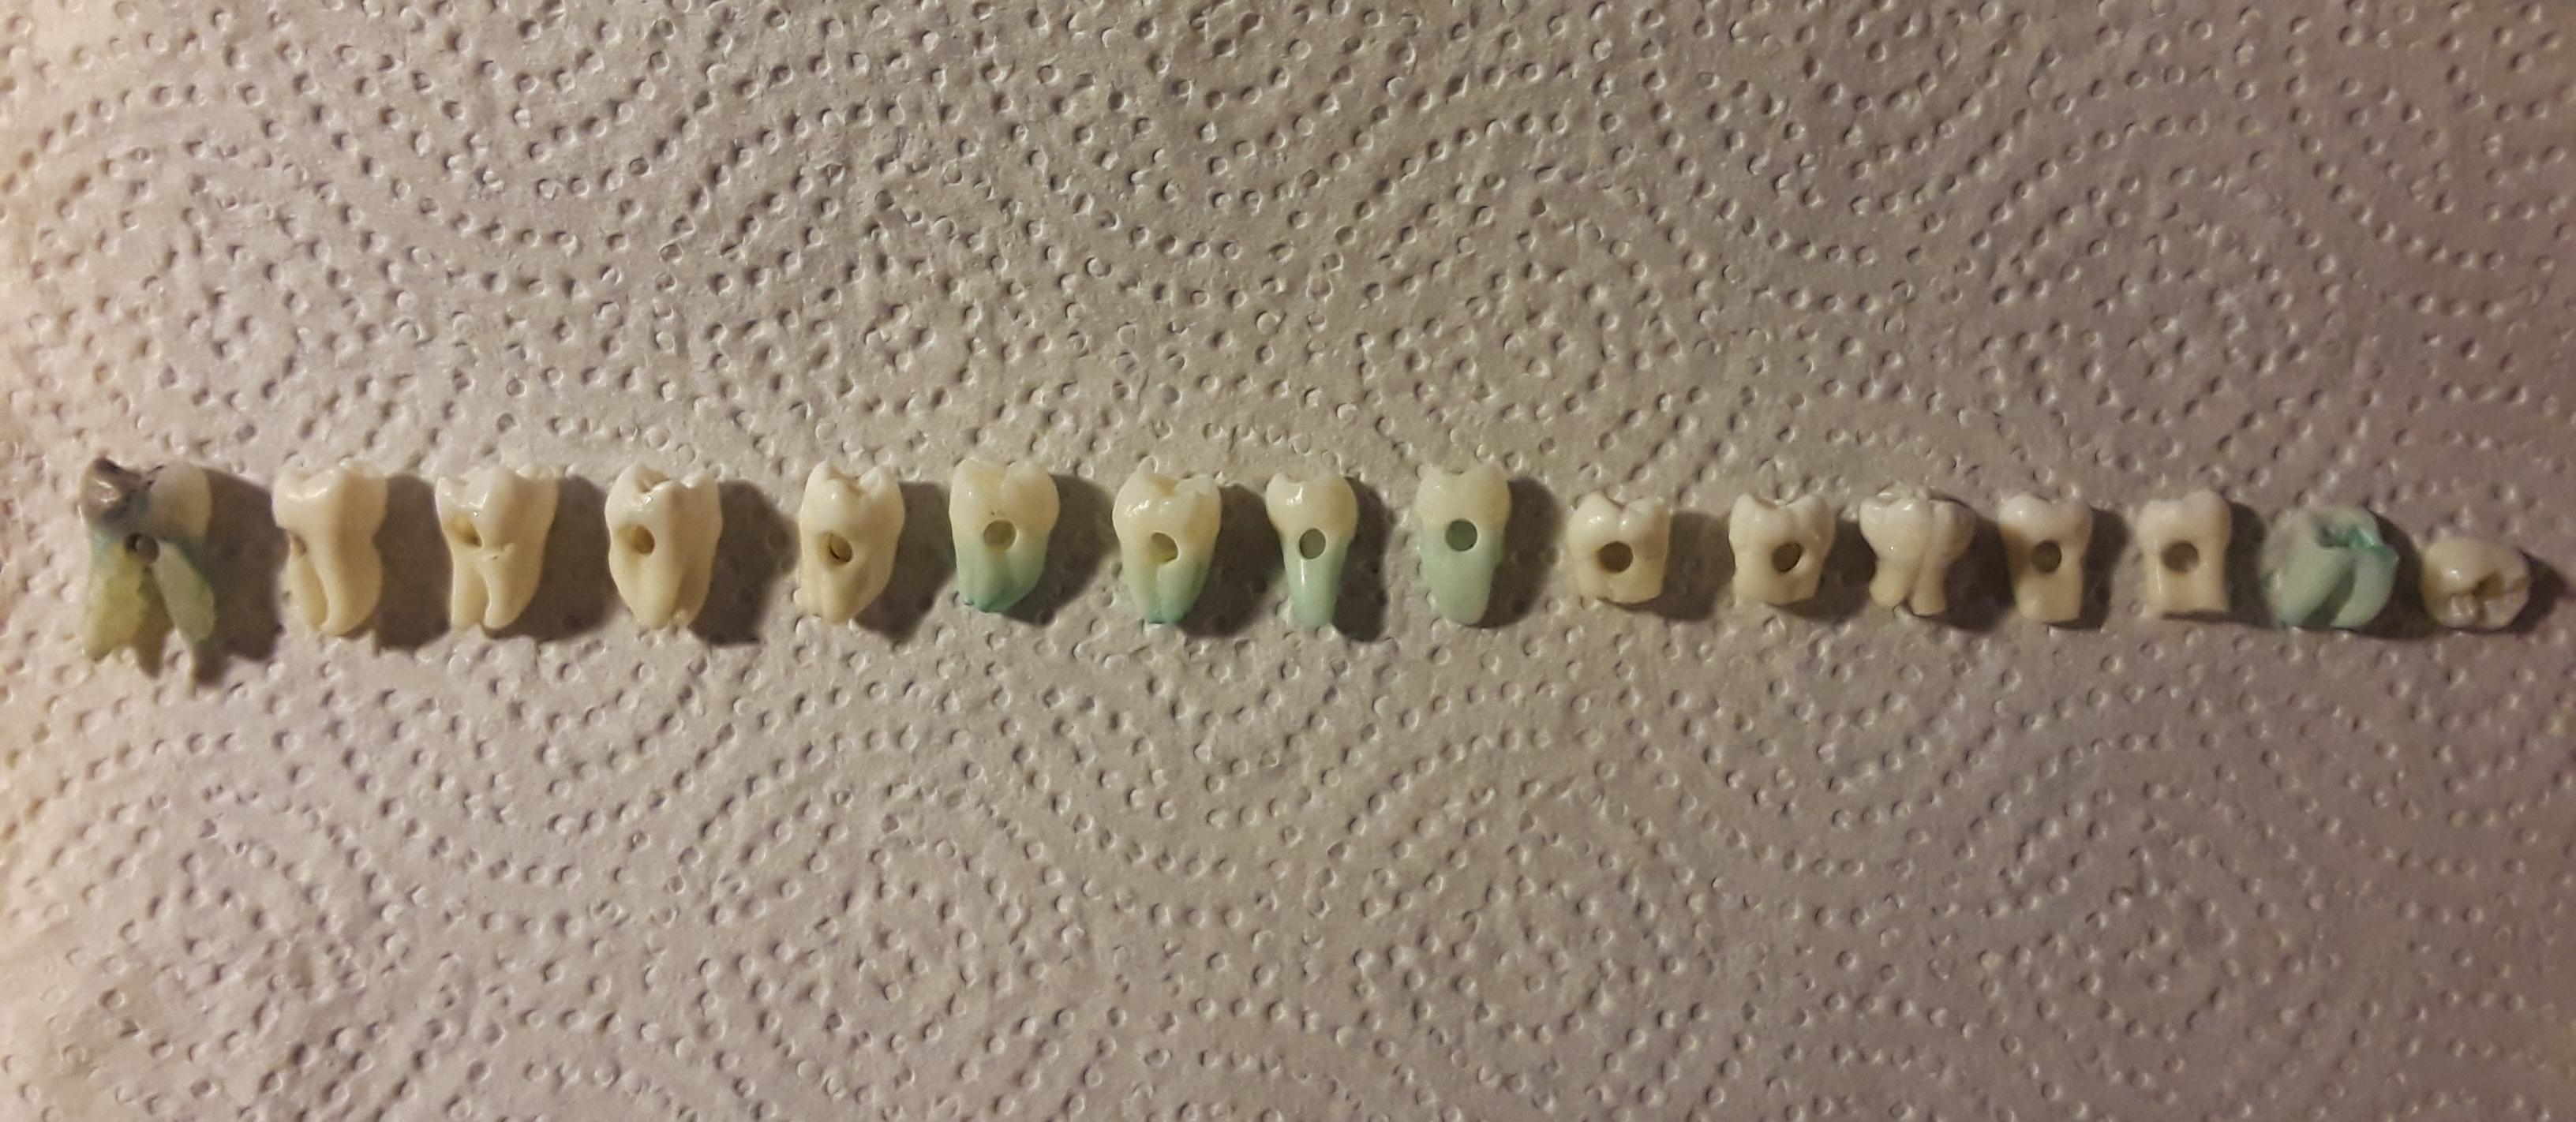 A row of variously shaped and sized teeth set against a textured background